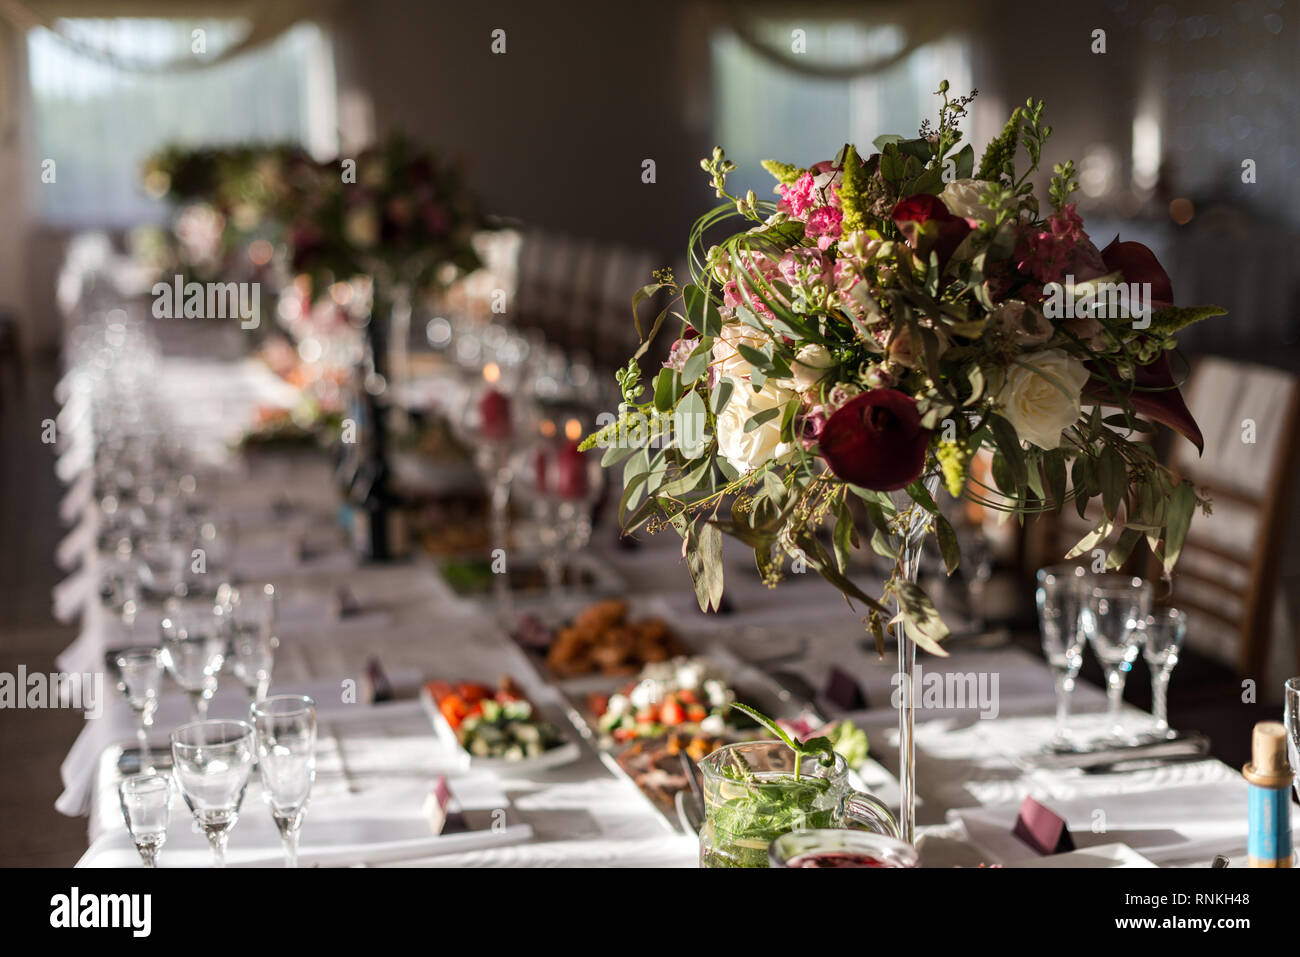 Wedding Birthday Reception Decoration Chairs Tables And Flowers